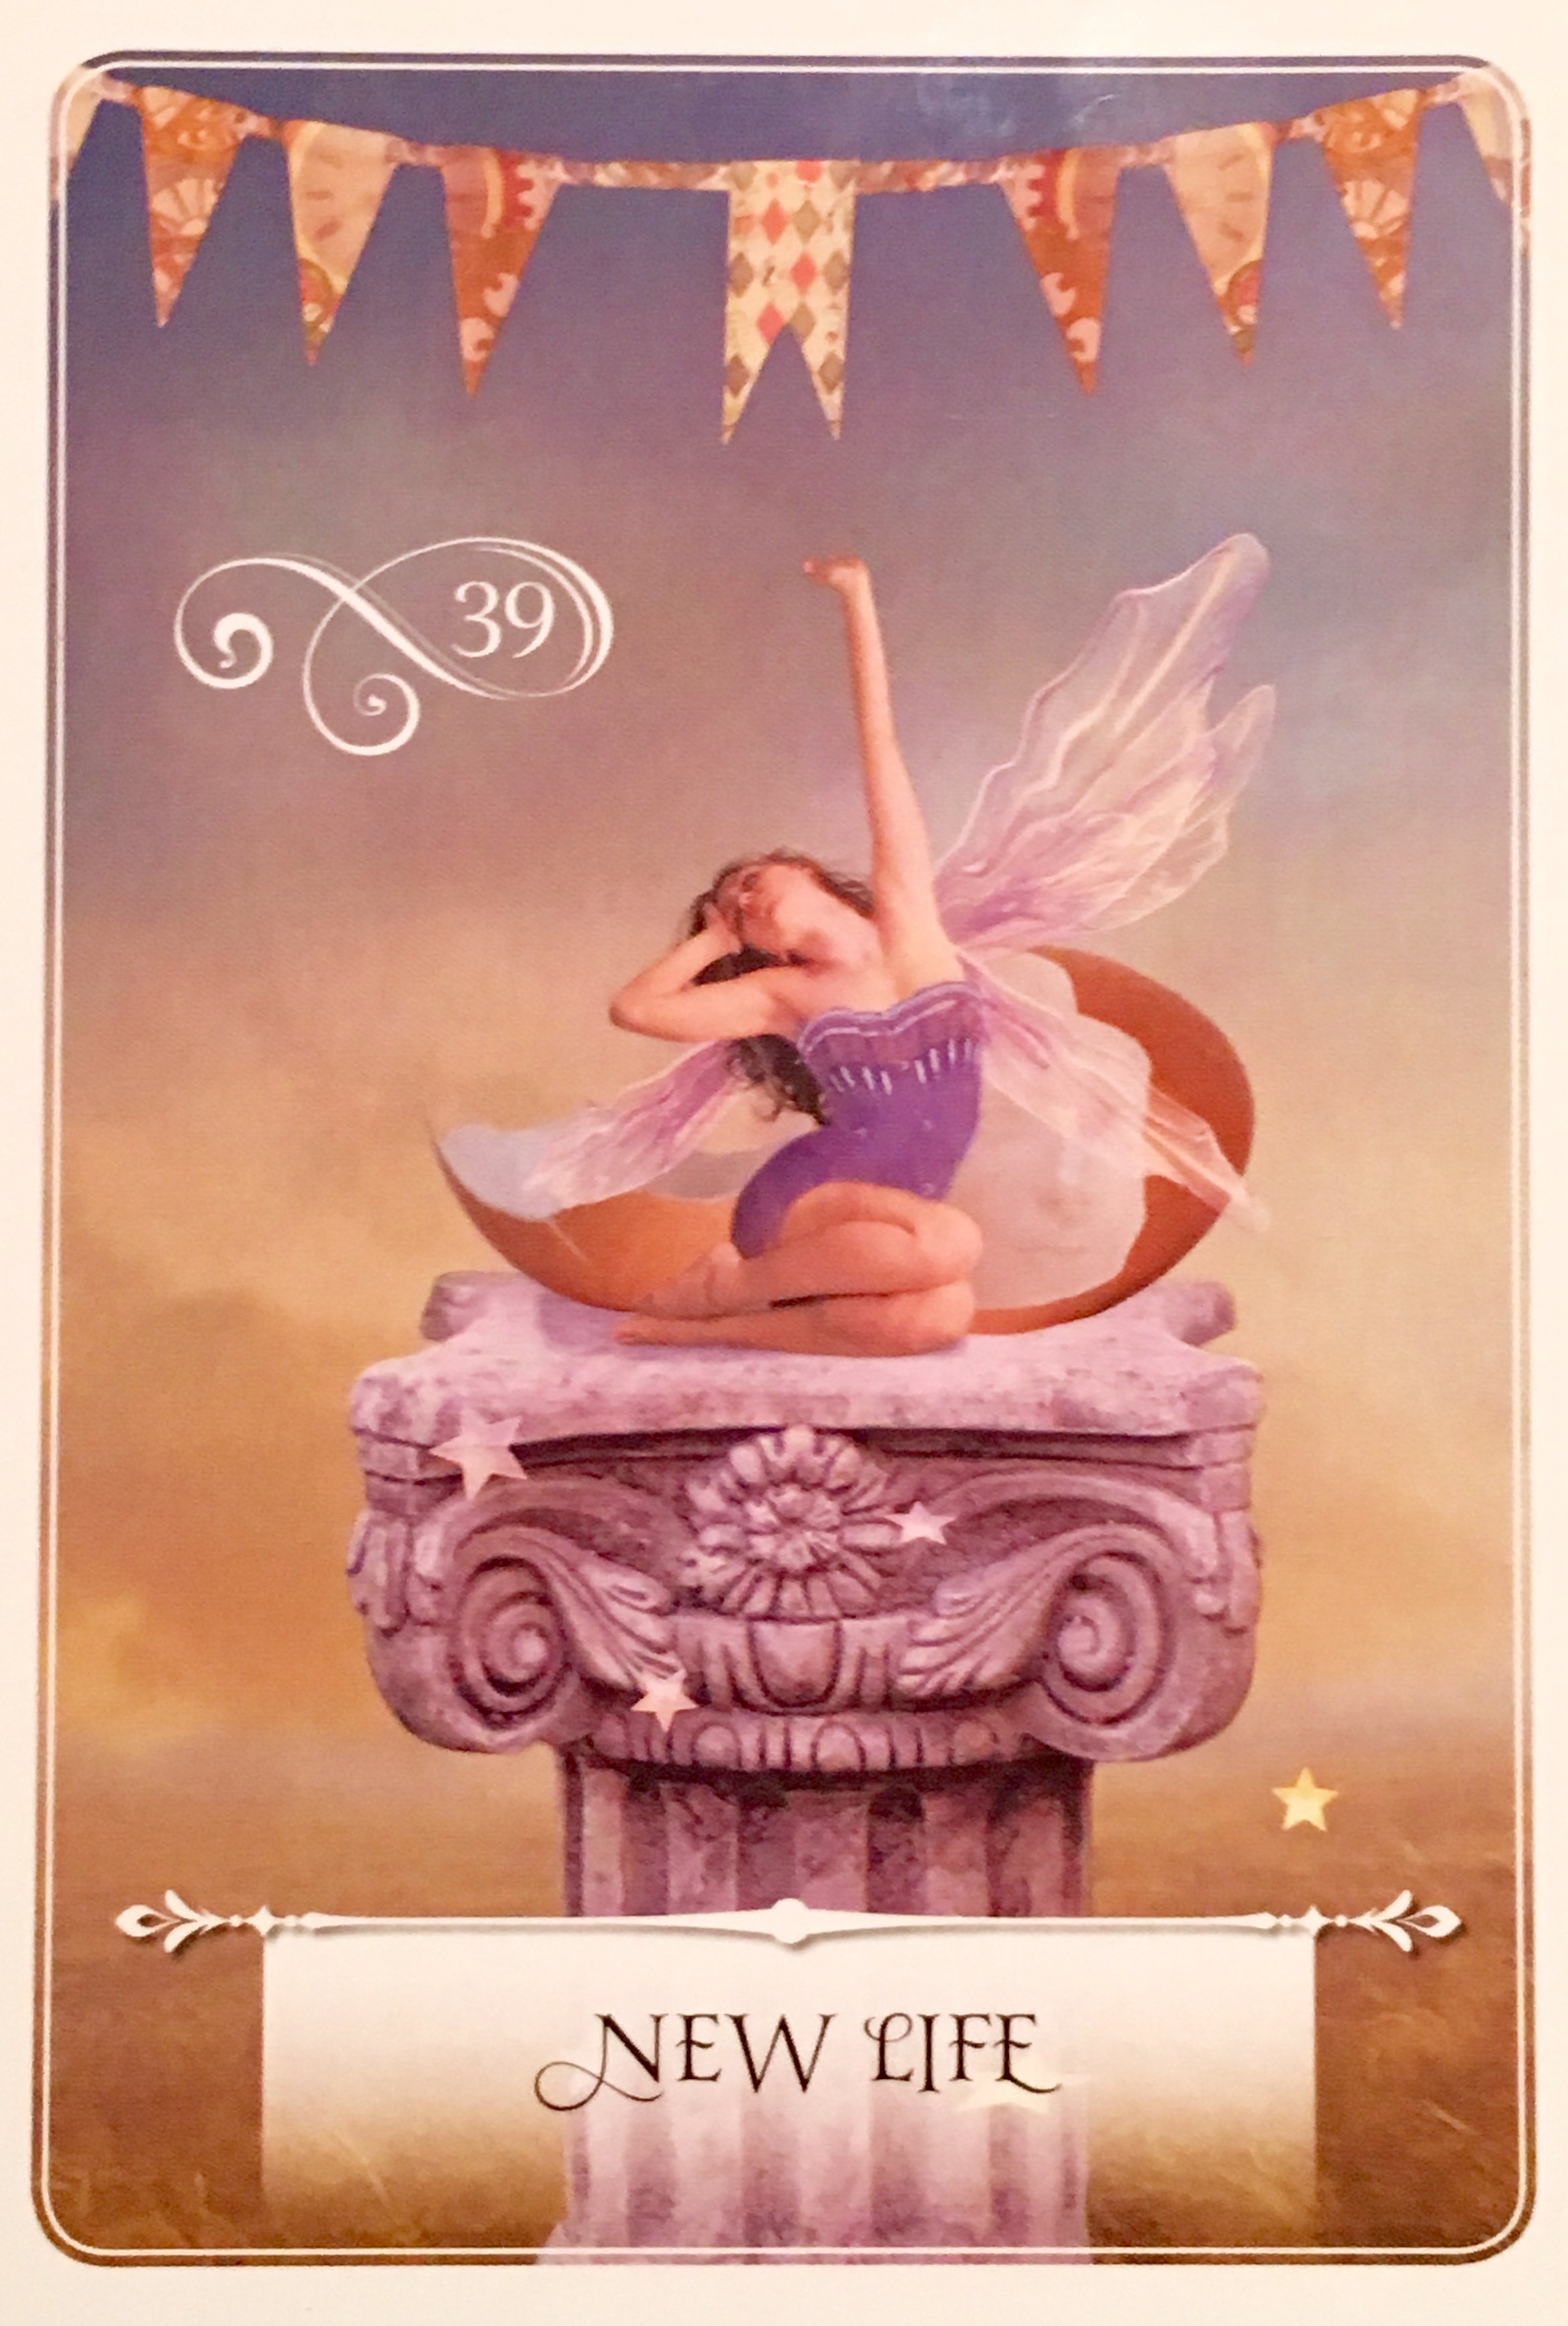 Wisdom of the Oracle Divination Cards : A 52-Card Oracle Deck for Love, Happiness, Spiritual Growth, and Living Your Pur pose (Cards) - image 5 of 6